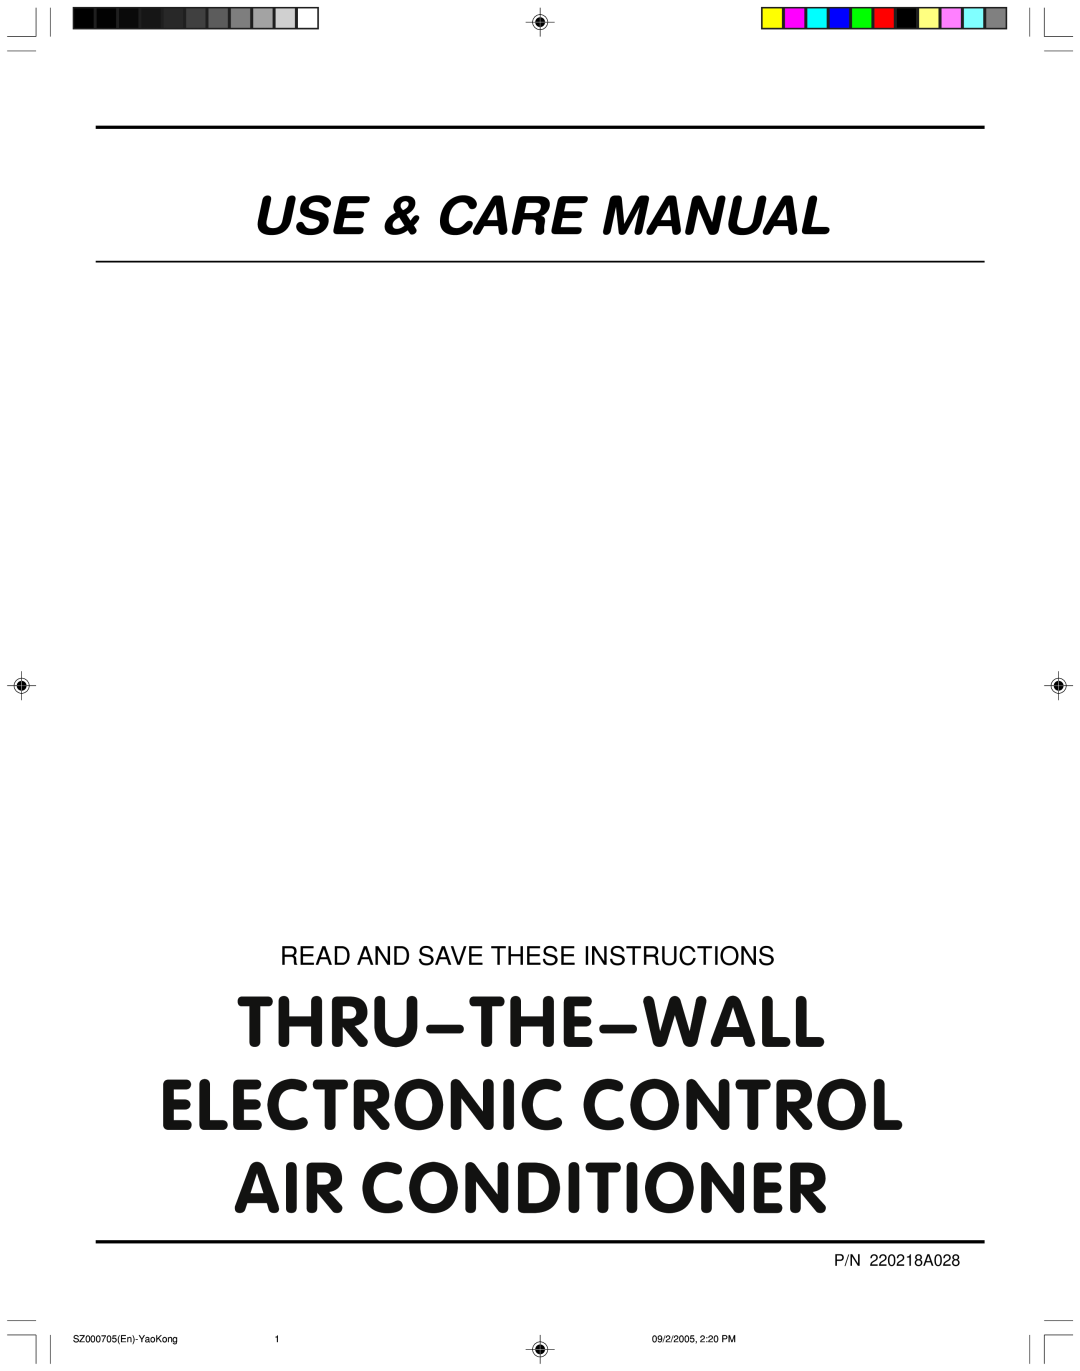 Frigidaire manual Use & Care Manual, Read And Save These Instructions, P/N 220218A028, SZ000705En-YaoKong 